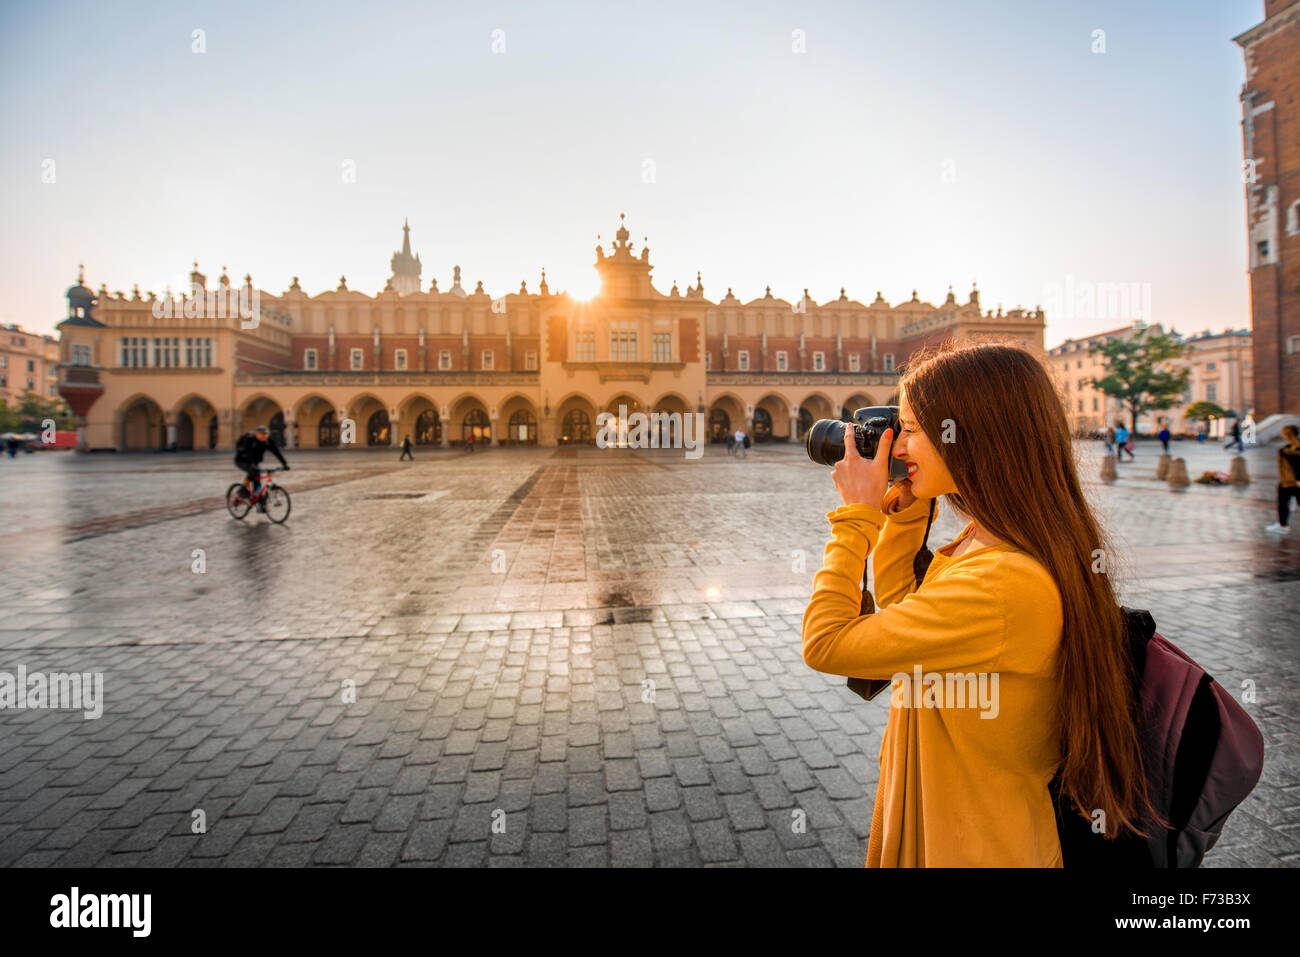 Young female tourist with camera and backpack photographing Cloth Hall in the old city center of Krakow Stock Photo